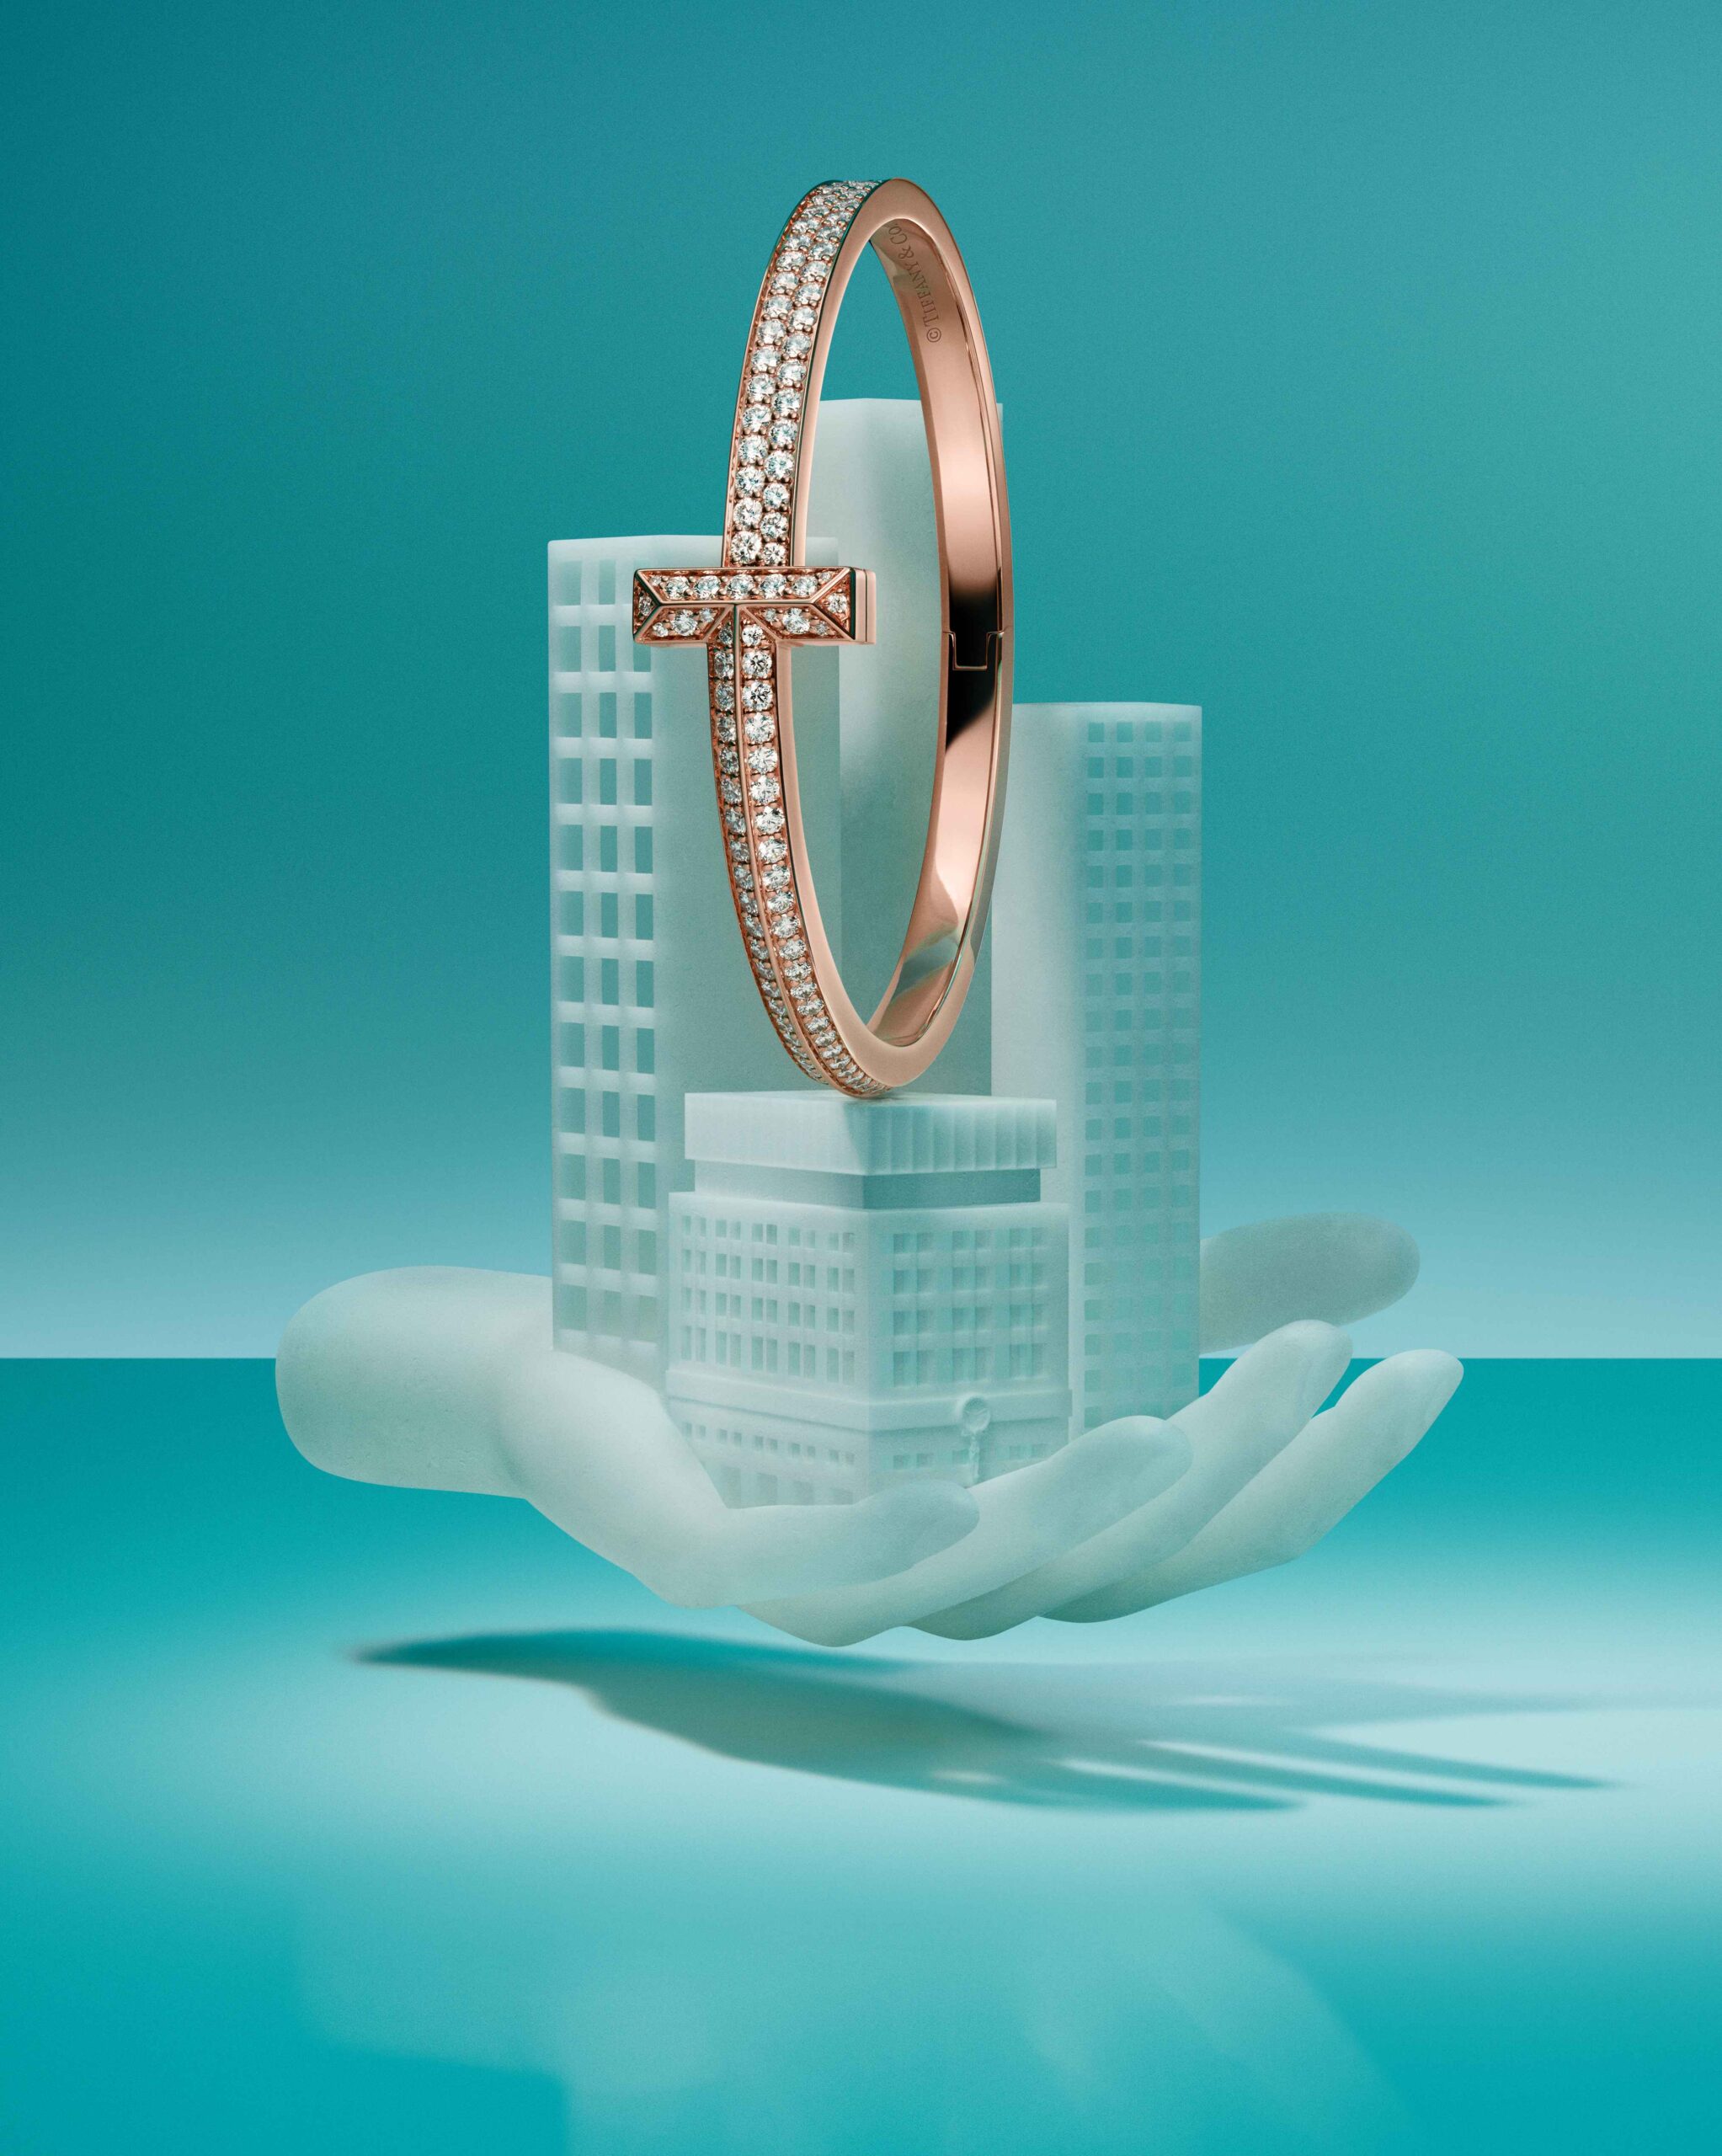 Tiffany & Co. at NUSTAR Resort and Casino is the Largest Store MEGA